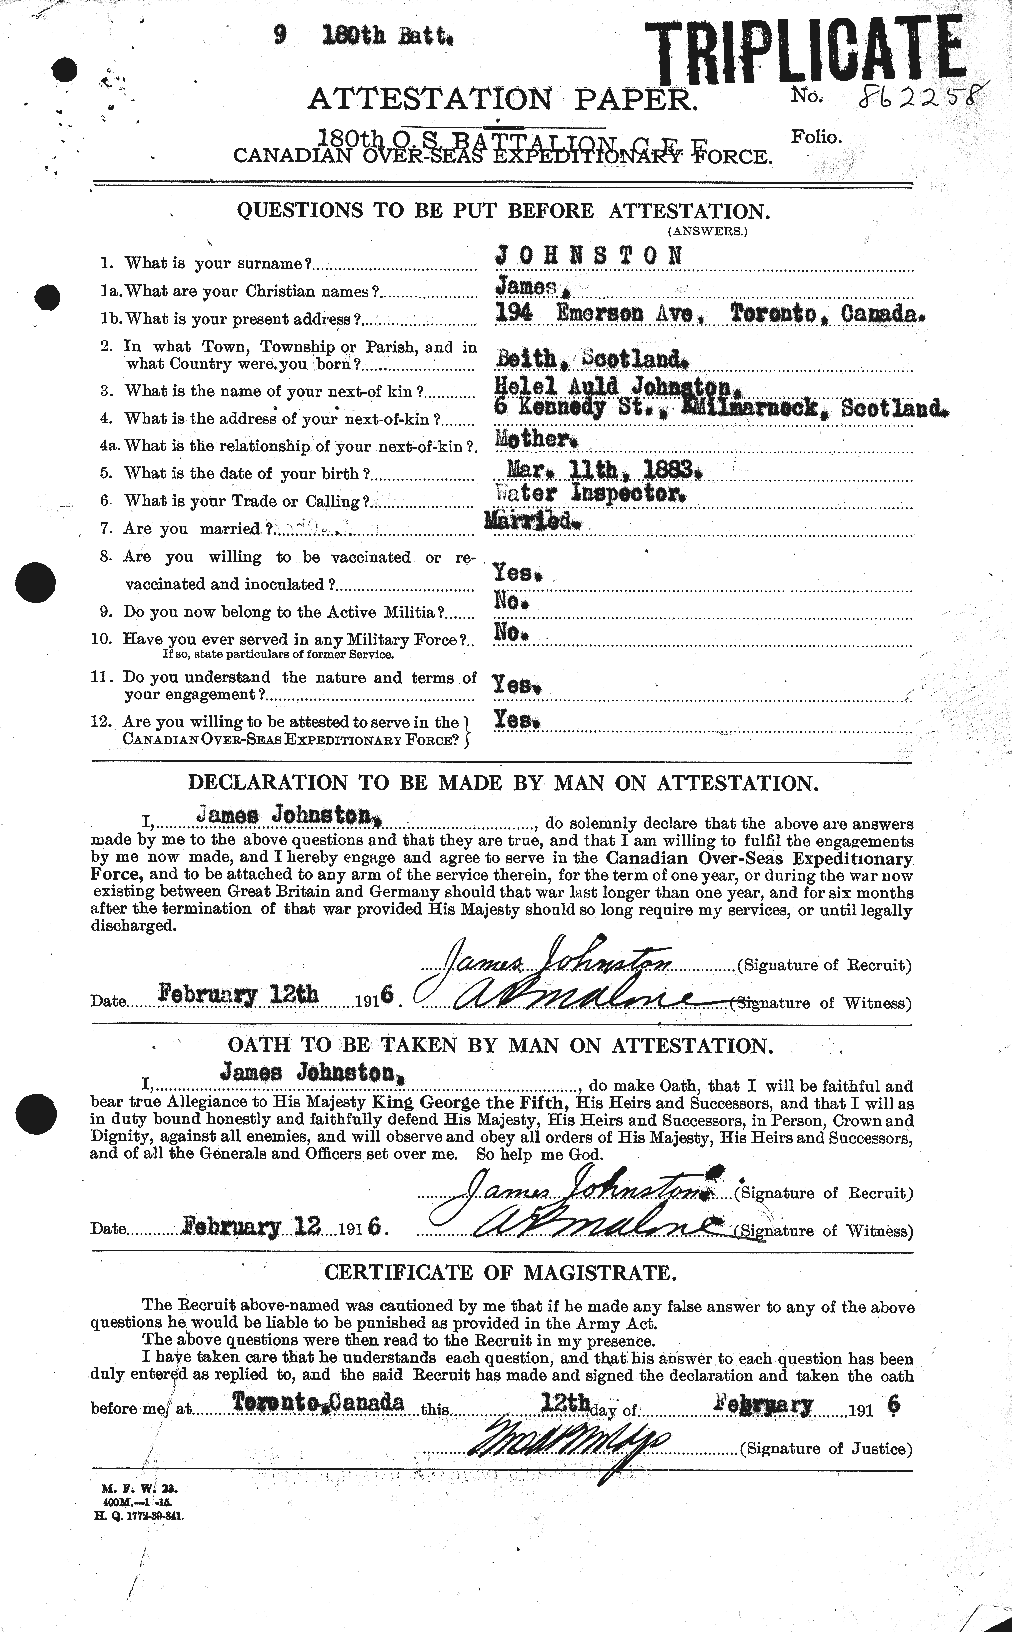 Personnel Records of the First World War - CEF 422714a